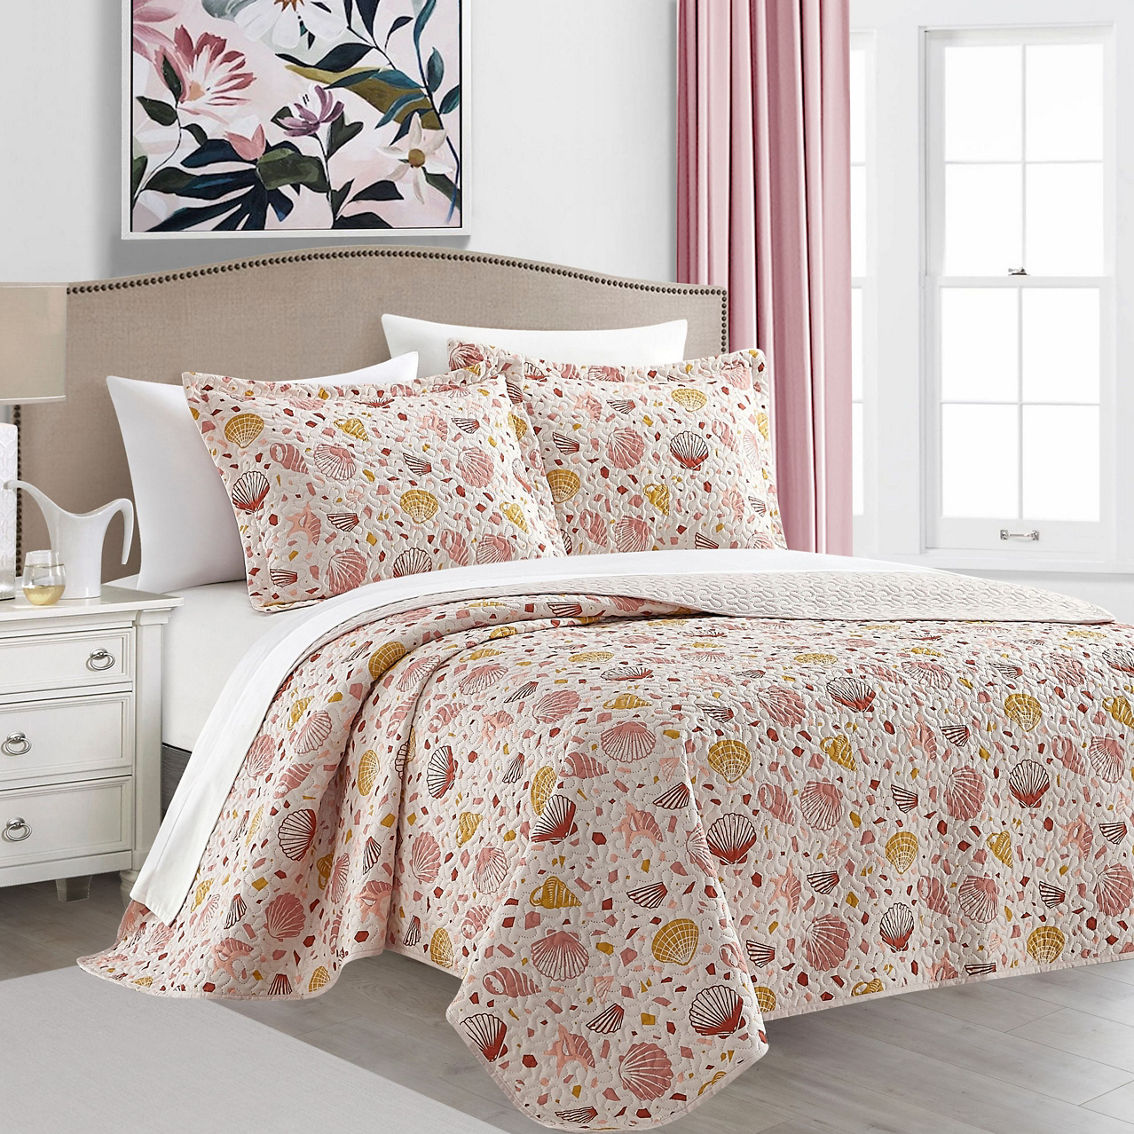 Chic Home Byrd 7pc Quilt Set - Image 2 of 5